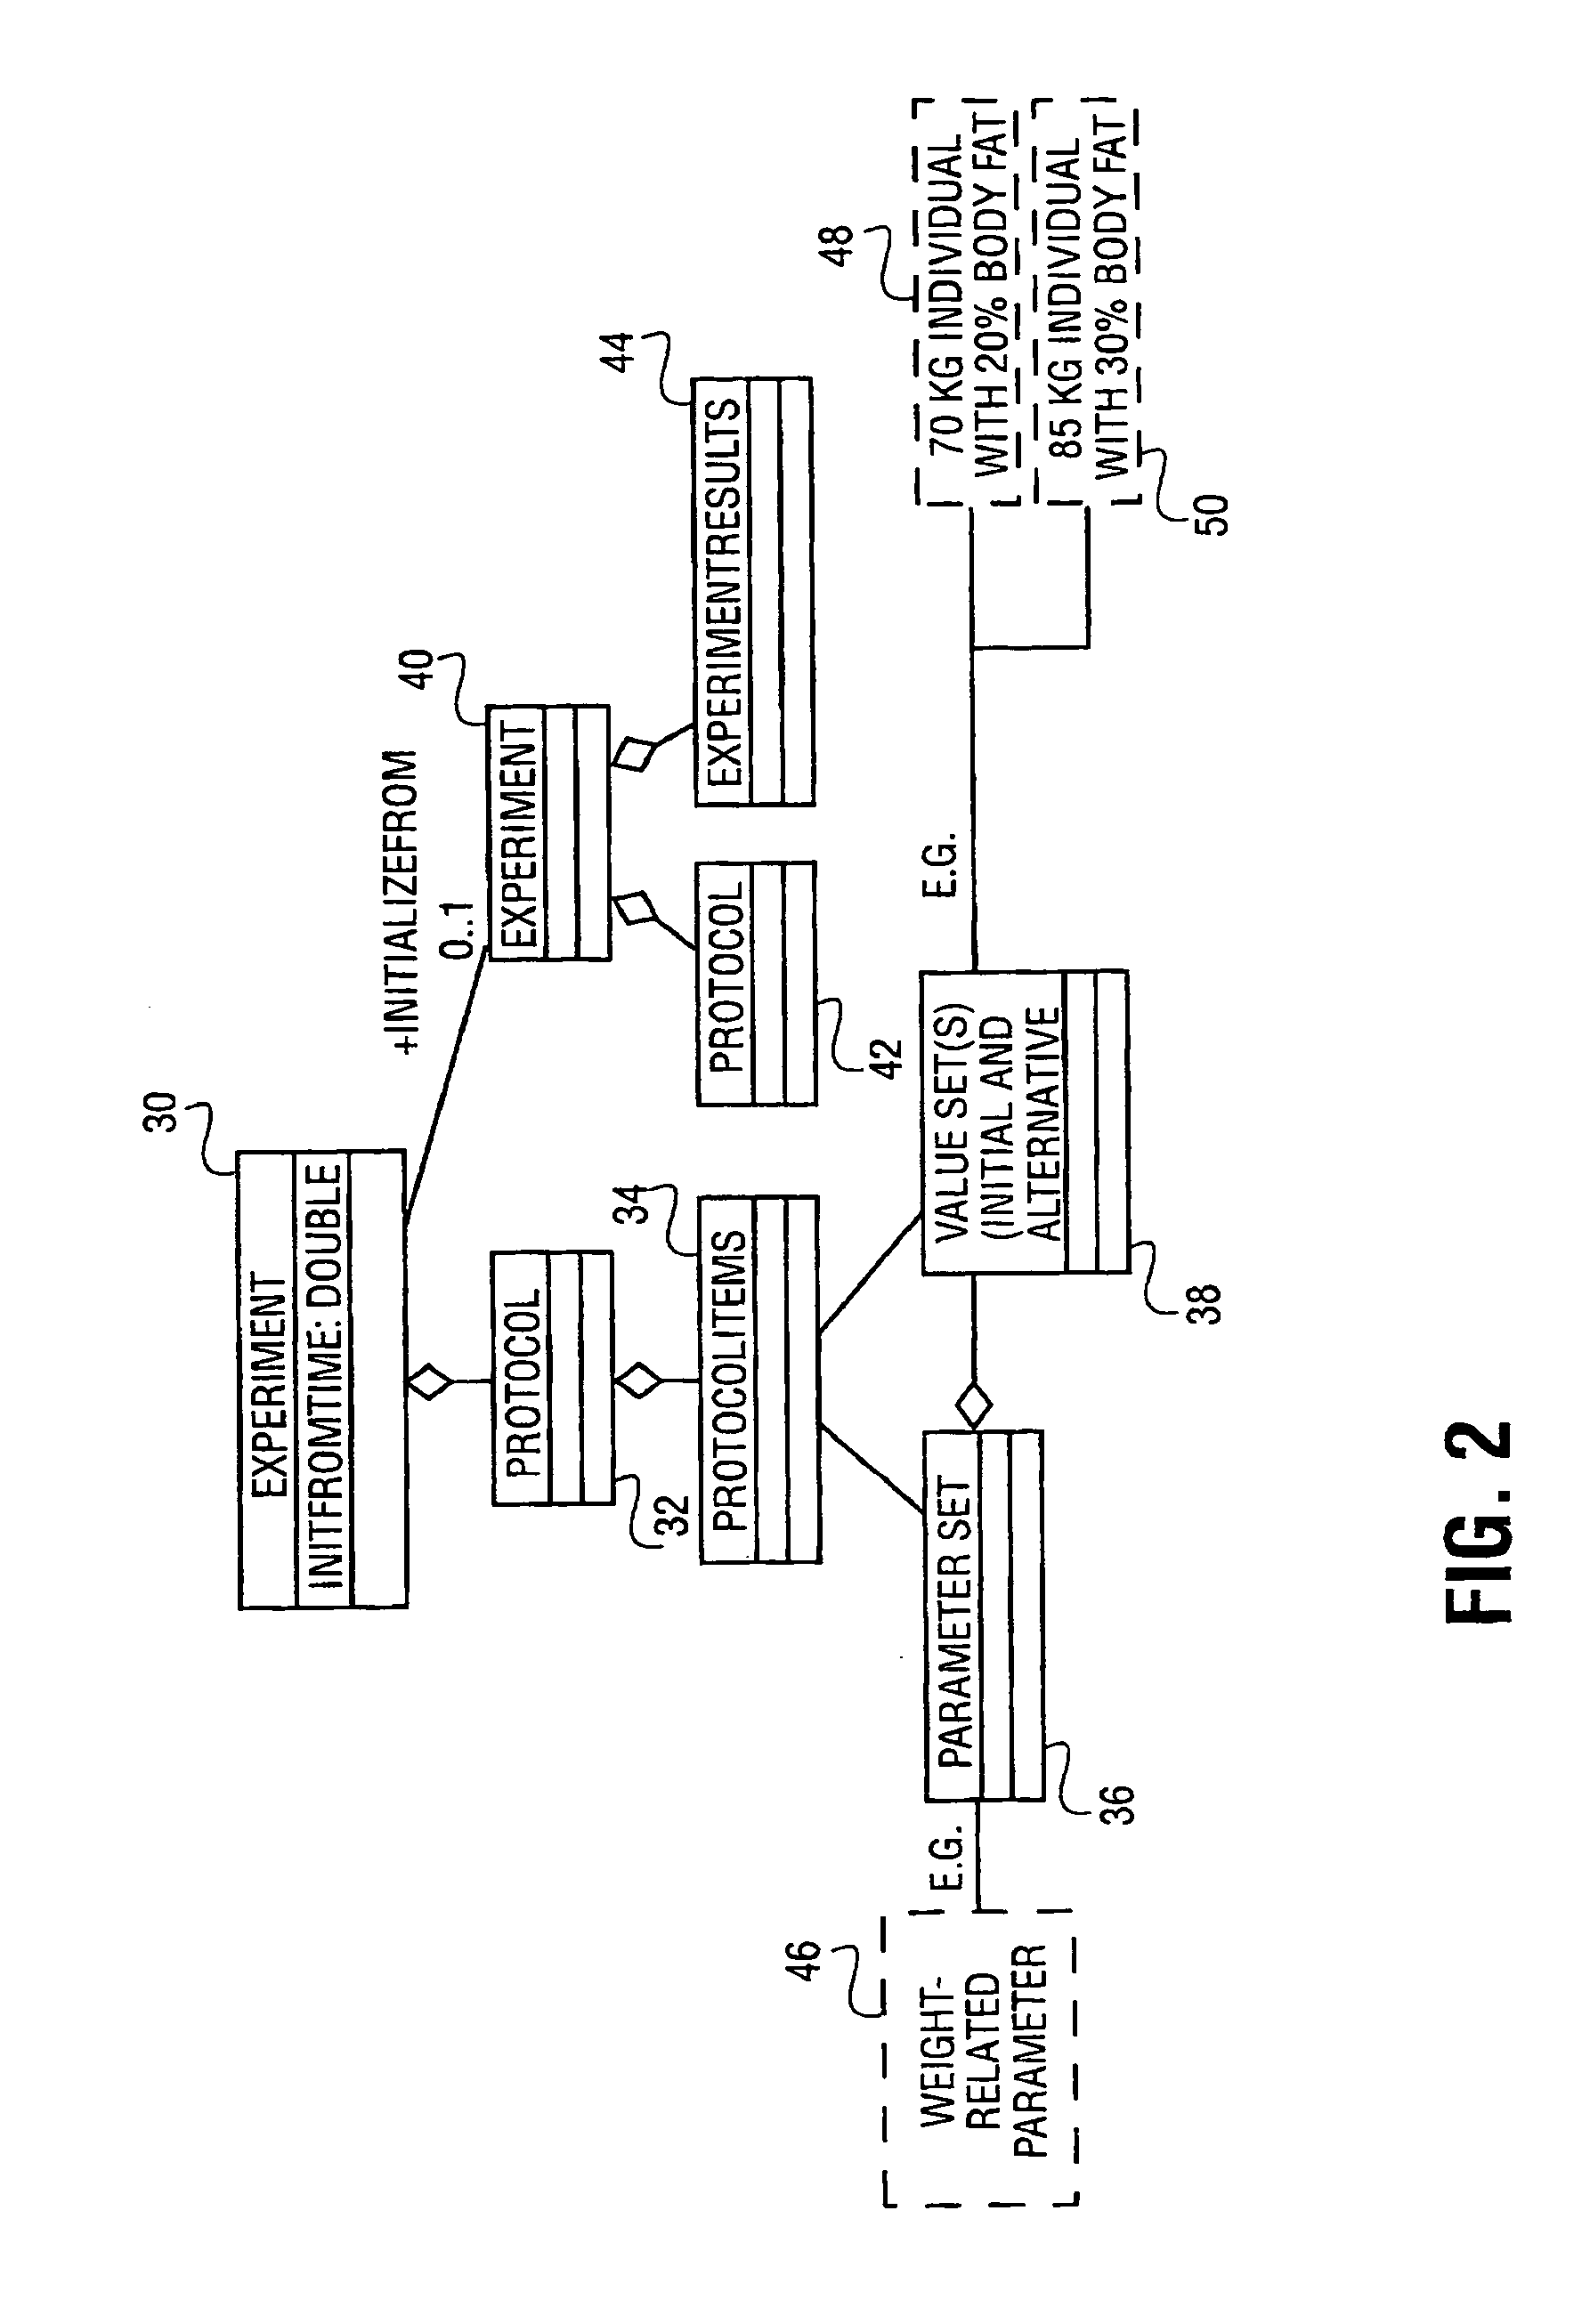 Method and apparatus for conducting linked simulation operations utilizing a computer-based system model